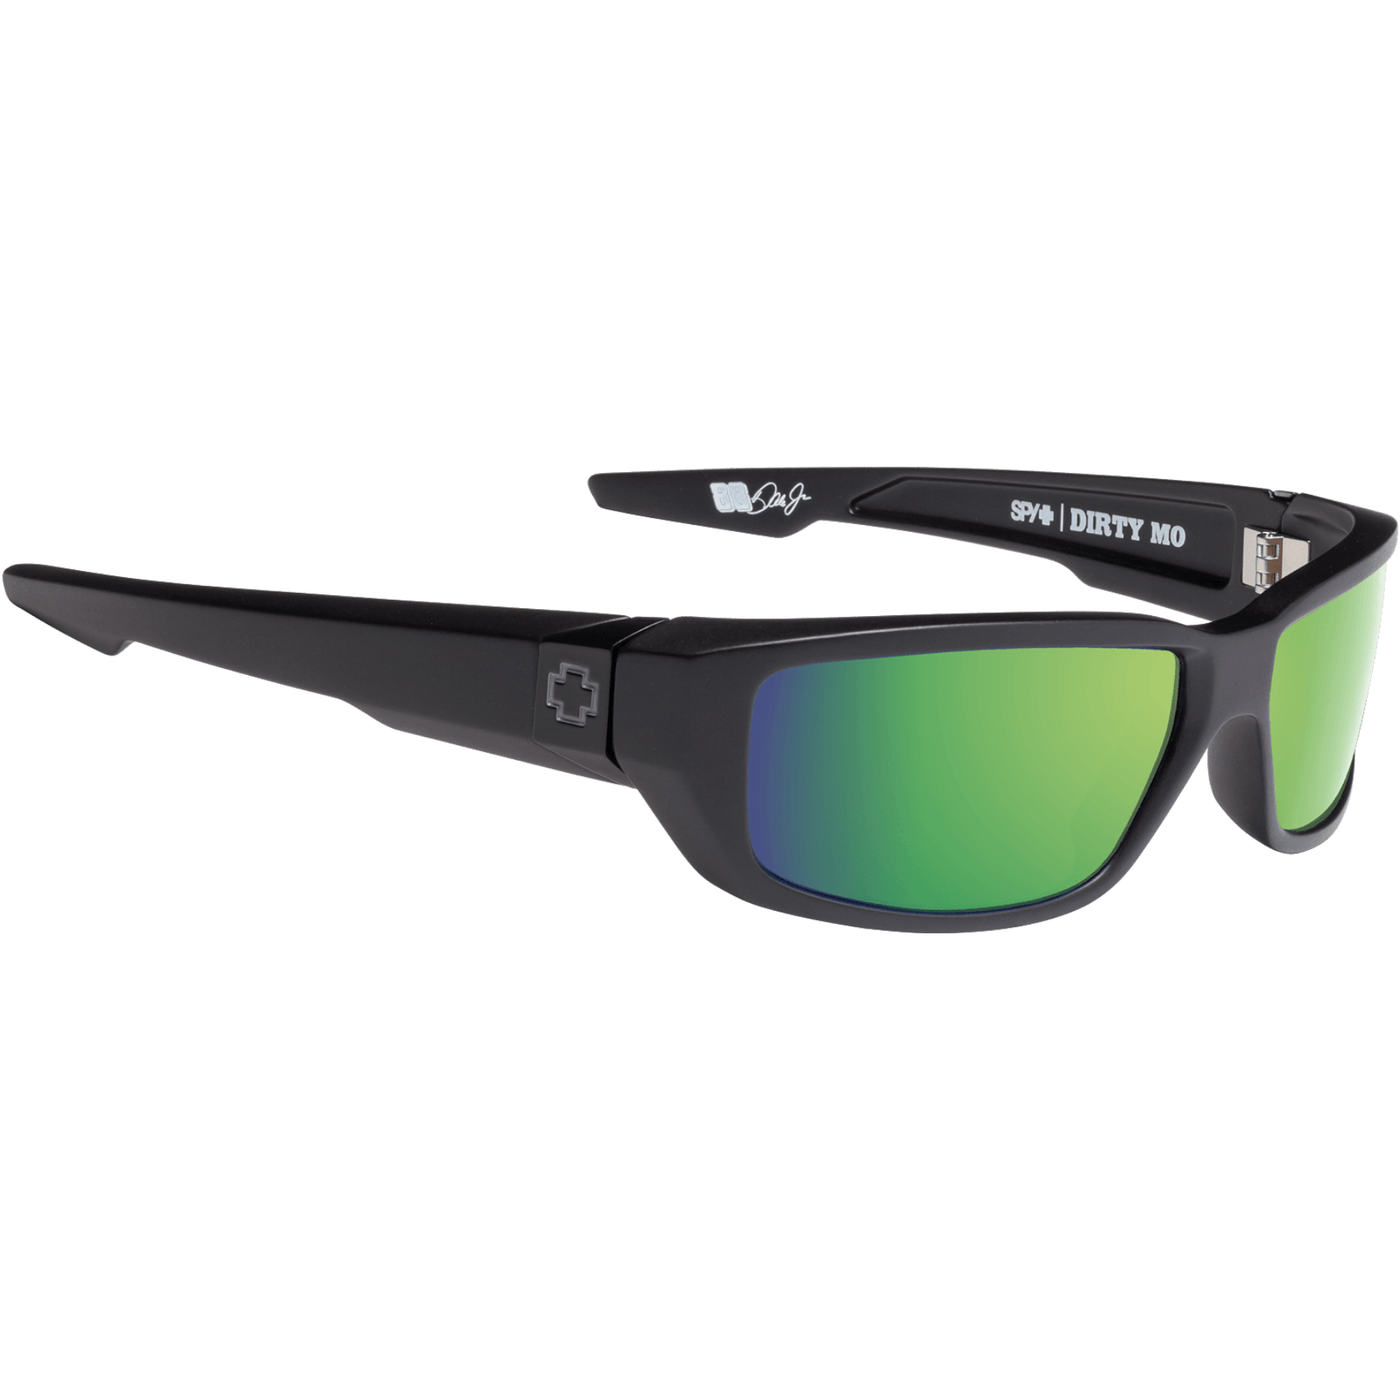 SPY DIRTY MO Polarized Sunglasses - Green/Matte Black 8Lines Shop - Fast Shipping